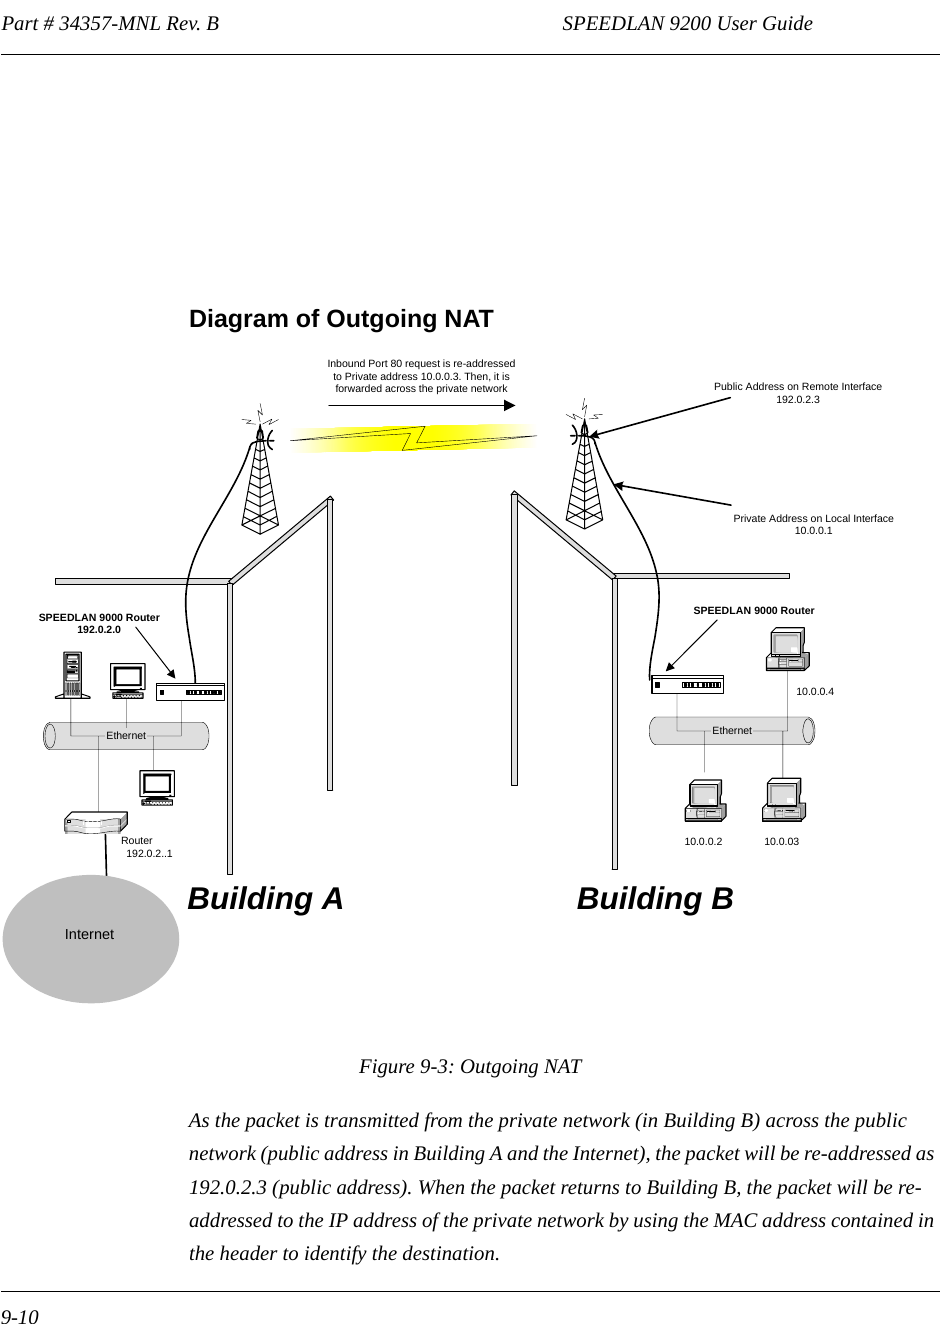 Part # 34357-MNL Rev. B                                                                  SPEEDLAN 9200 User Guide 9-10Diagram of Outgoing NATFigure 9-3: Outgoing NATAs the packet is transmitted from the private network (in Building B) across the public network (public address in Building A and the Internet), the packet will be re-addressed as 192.0.2.3 (public address). When the packet returns to Building B, the packet will be re-addressed to the IP address of the private network by using the MAC address contained in the header to identify the destination.  Inbound Port 80 request is re-addressedto Private address 10.0.0.3. Then, it isforwarded across the private networkEthernet                               Router                                        192.0.2..1Private Address on Local Interface10.0.0.110.0.0.2                     10.0.0.4EthernetPublic Address on Remote Interface192.0.2.3Building A Building BSPEEDLAN 9000 Router192.0.2.0SPEEDLAN 9000 Router10.0.03–Internet